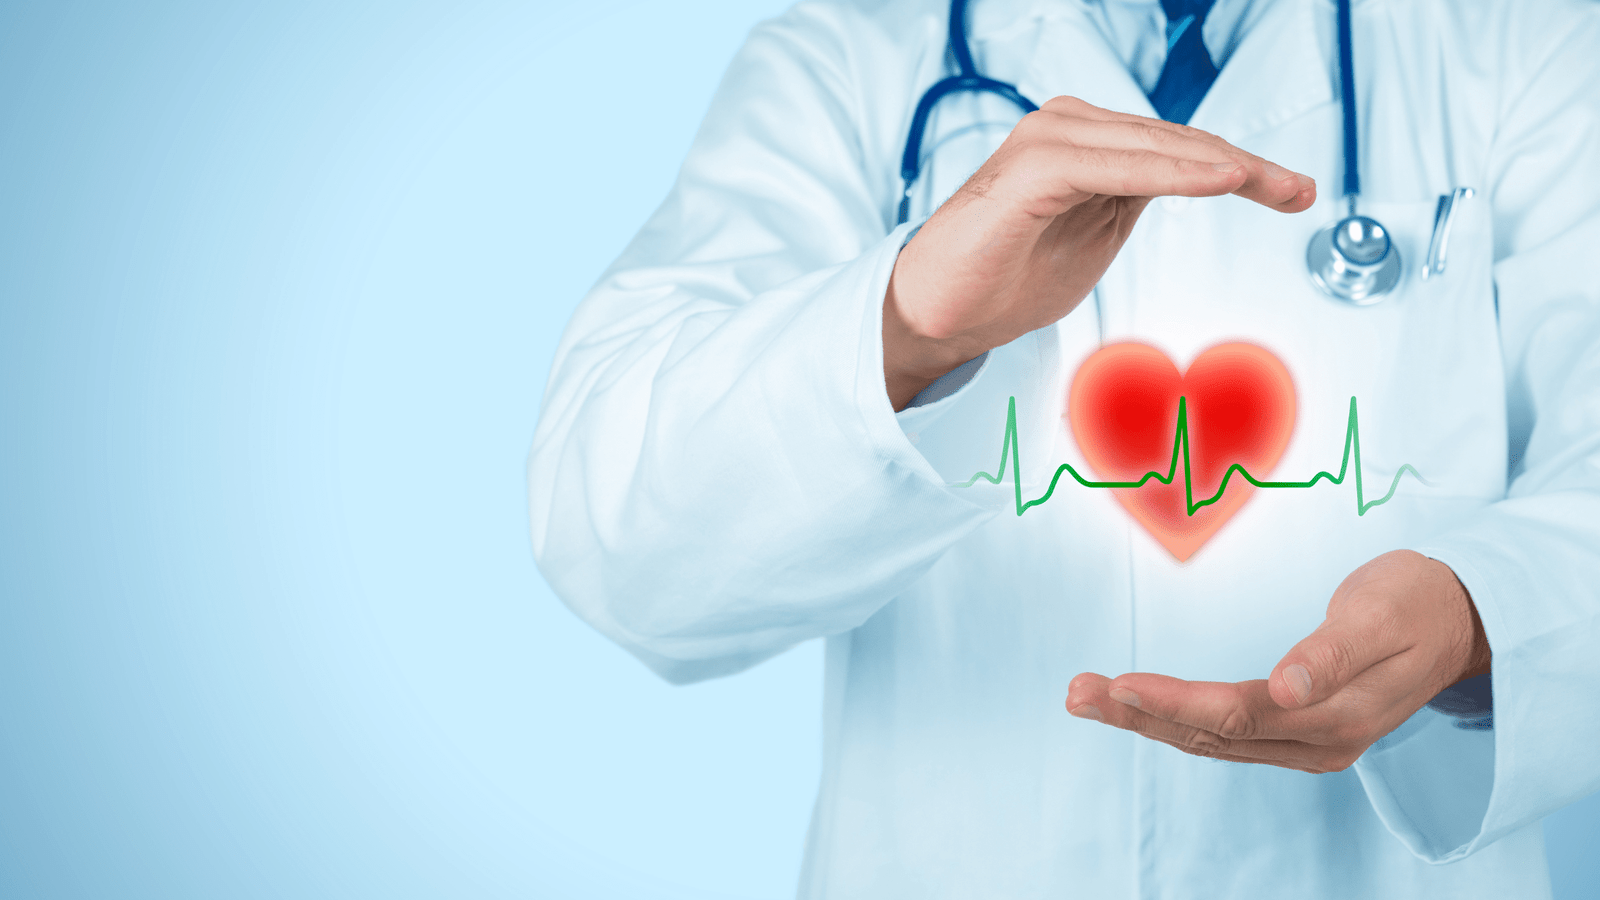 7 ways to improve your heart health